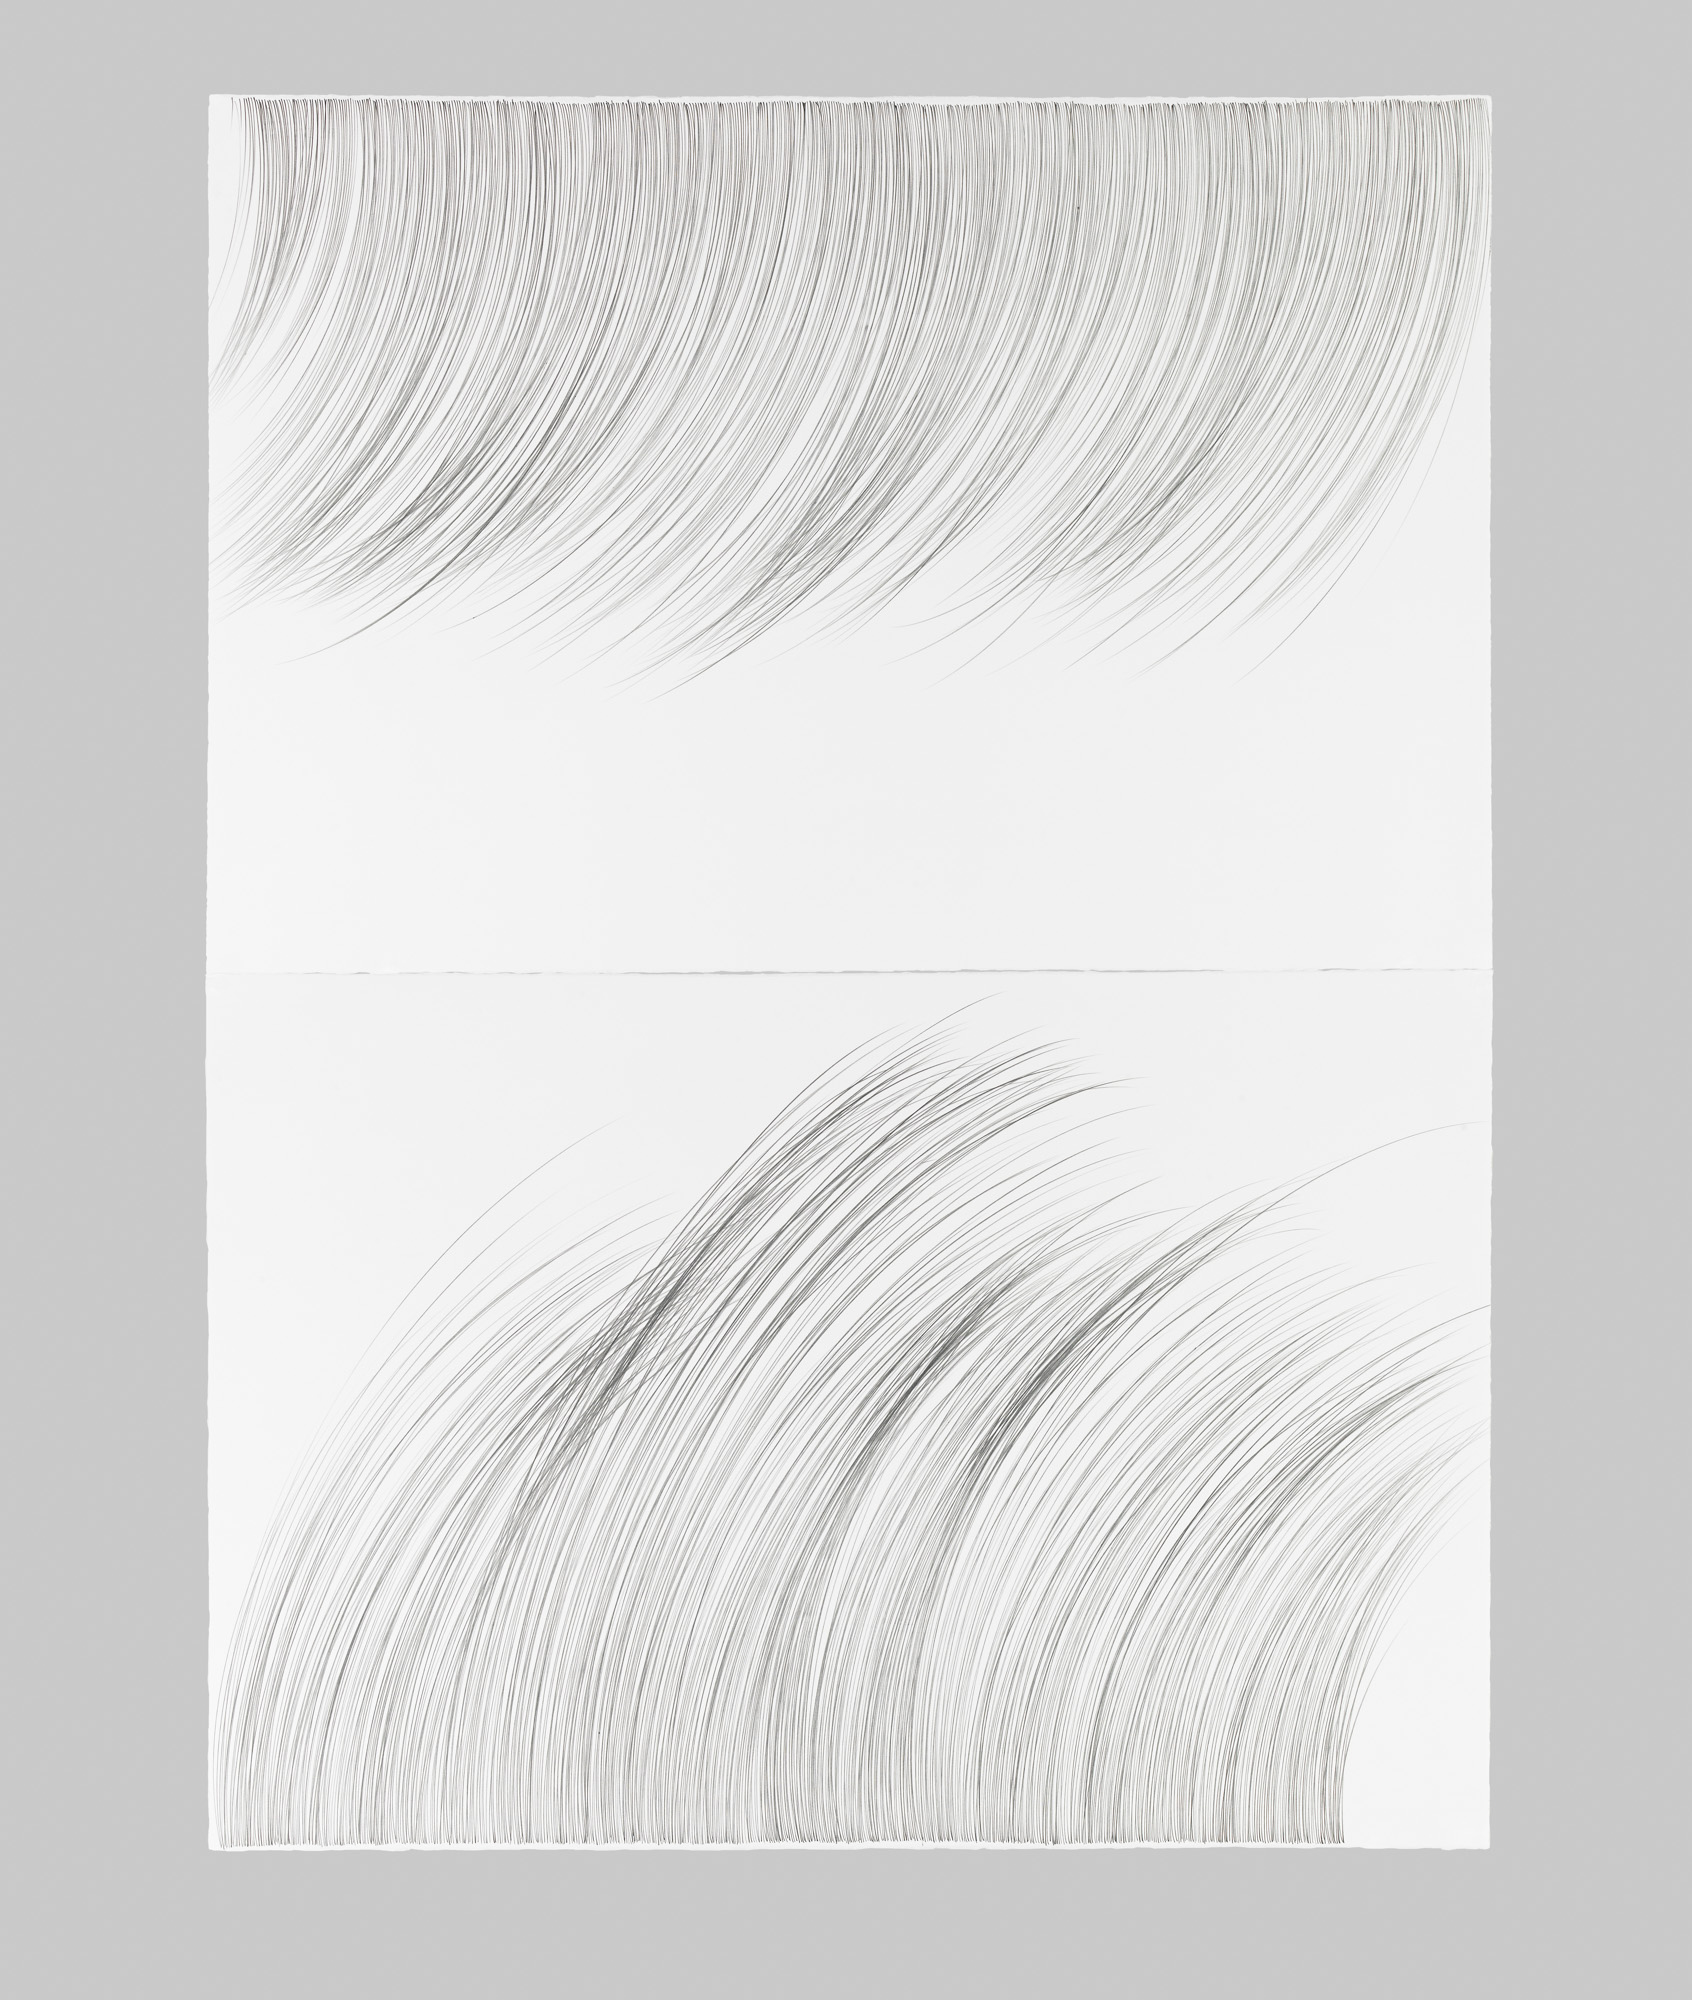 Large RainGrass, I   Graphite on cotton paper, 60 x 44 inches, diptych, 2015